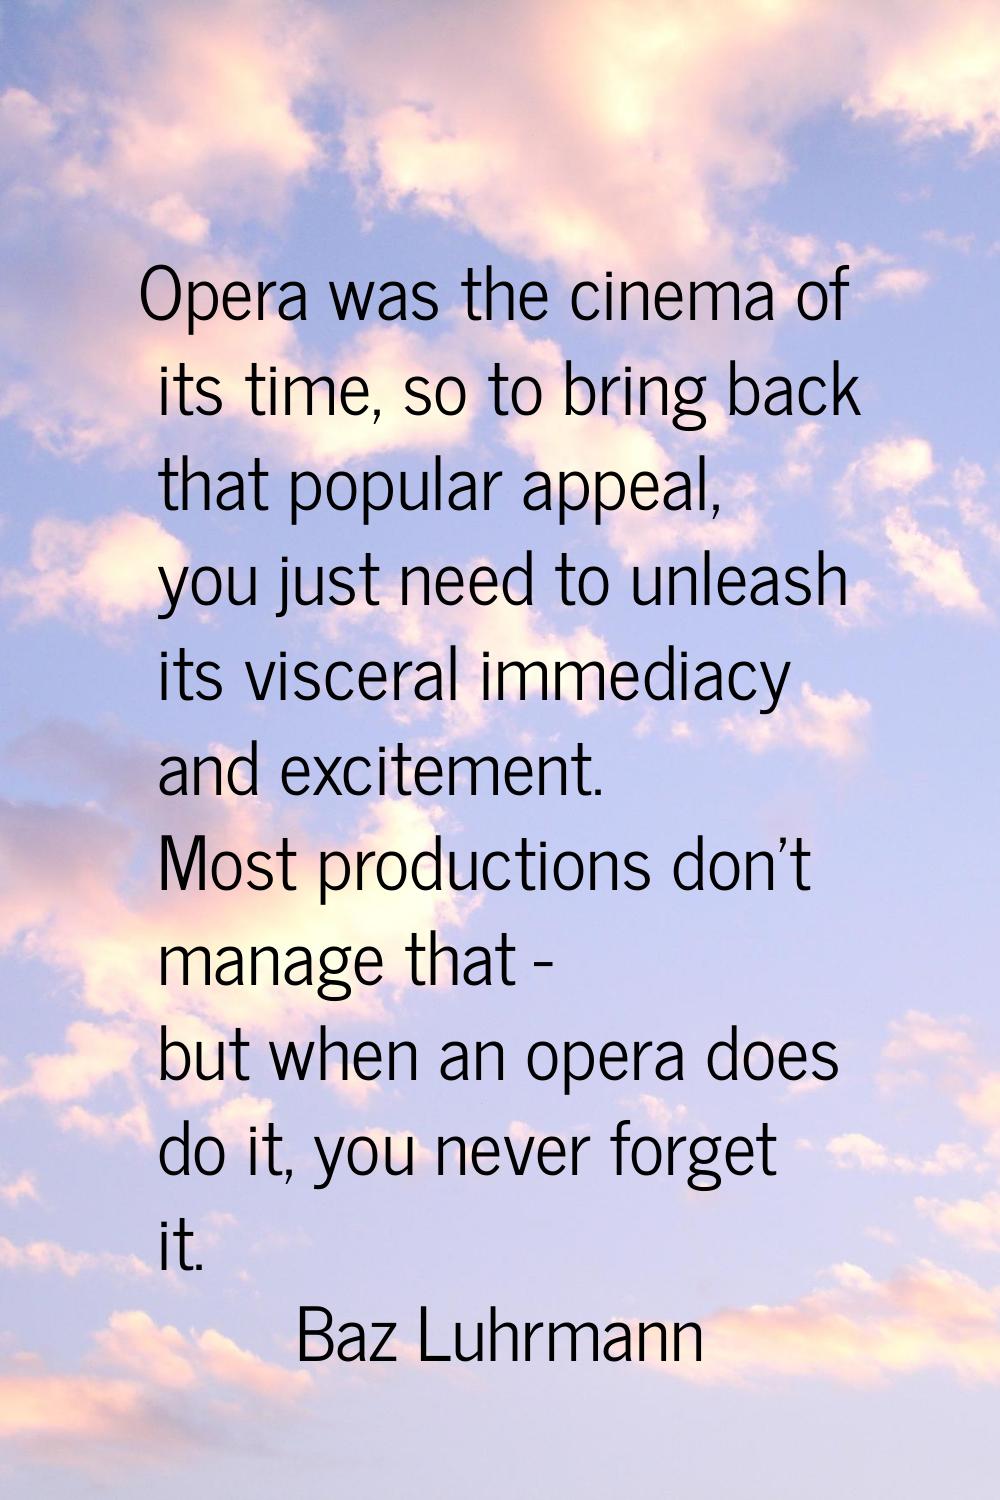 Opera was the cinema of its time, so to bring back that popular appeal, you just need to unleash it